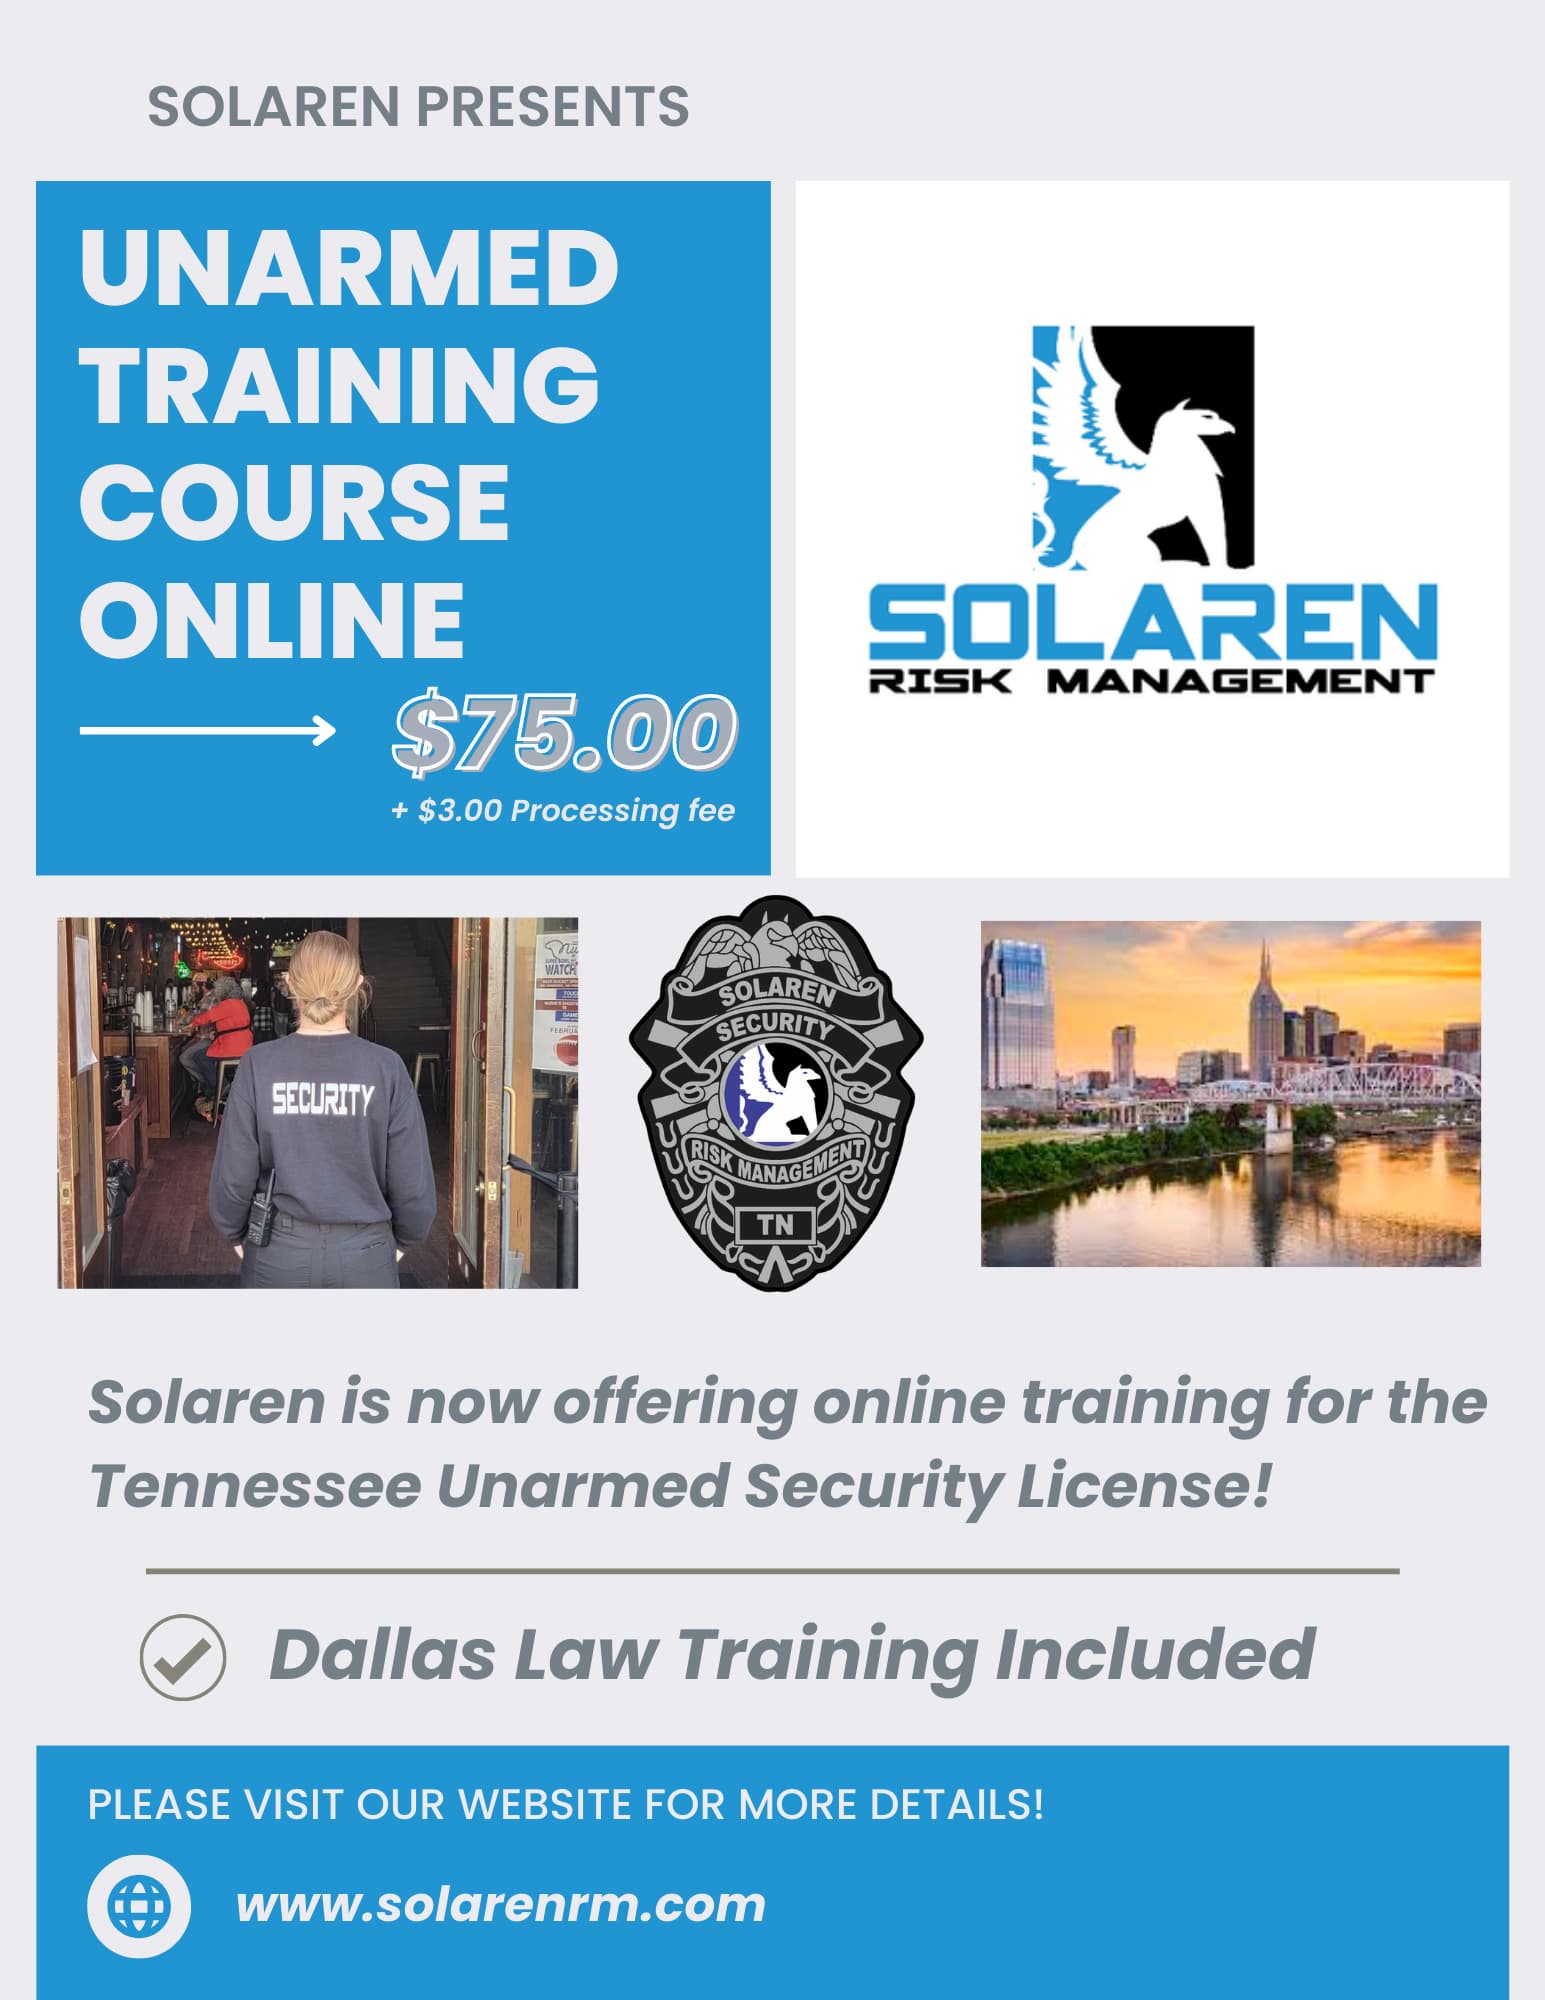 solaren-now-offering-online-training-courses-for-unarmed-security-included-with-dallas-law